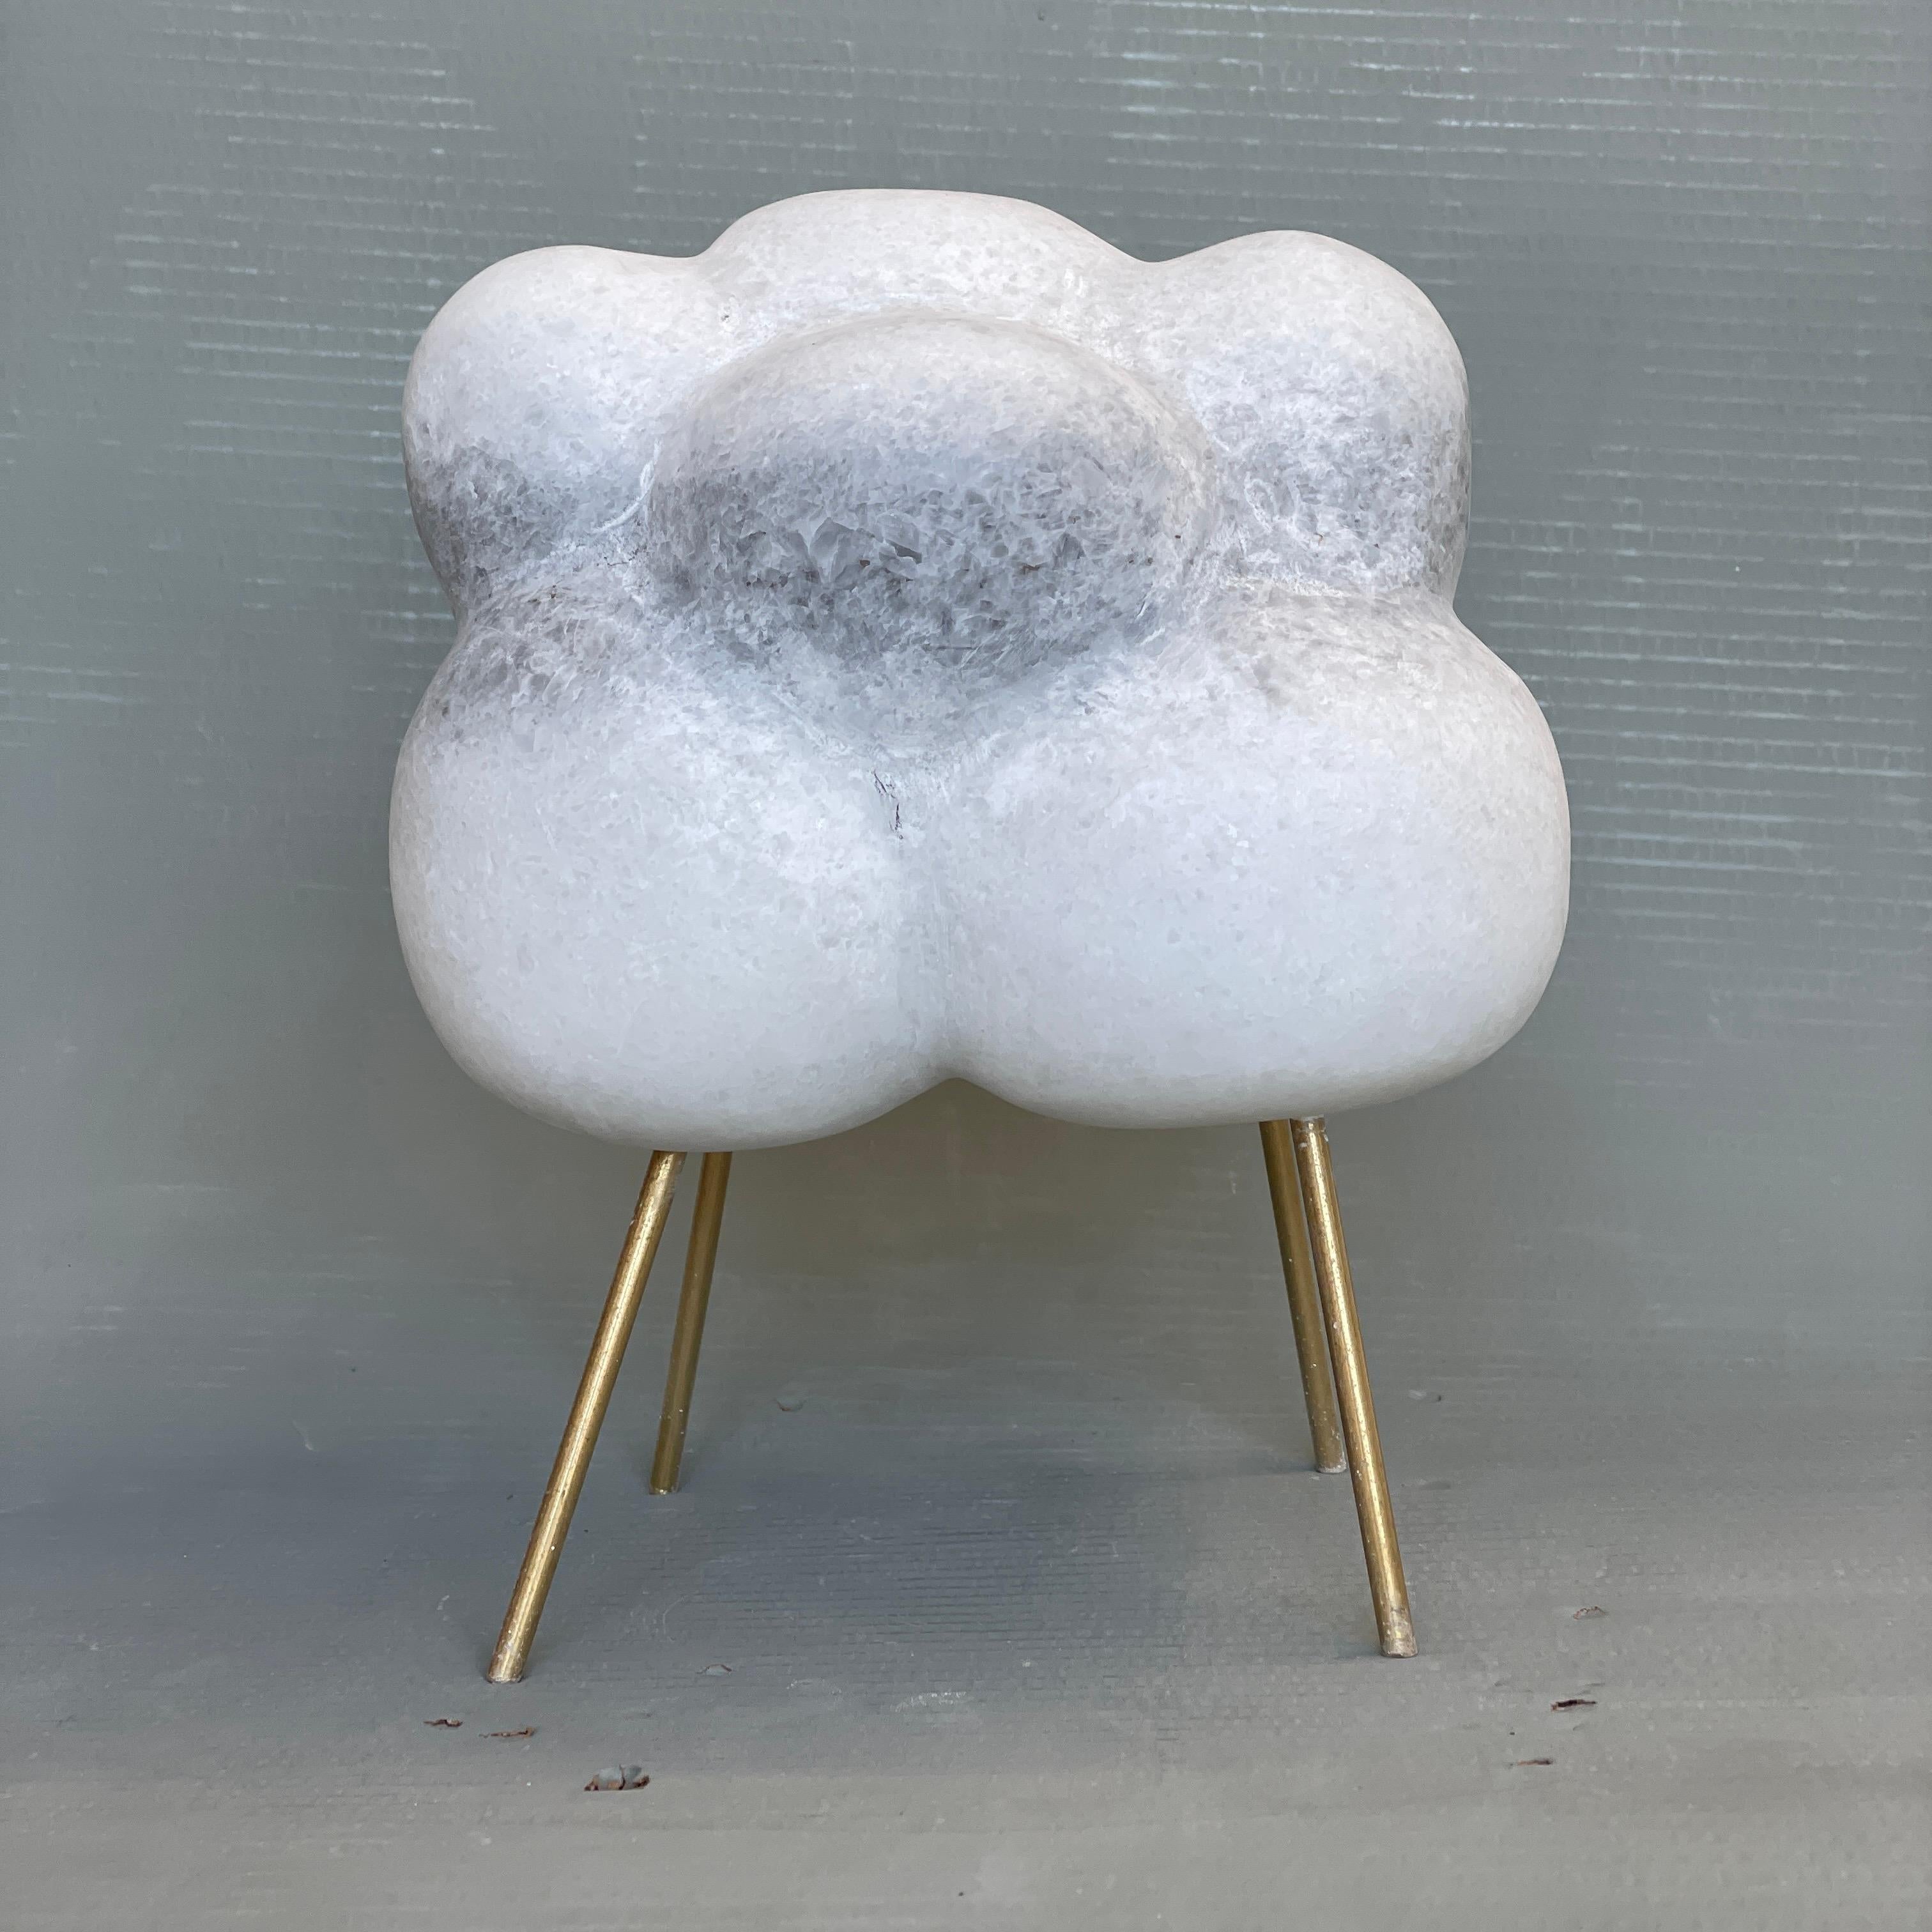 Cloud with bronze sticks marble sculpture by Tom Von Kaenel.
Dimensions: D 19 x W 20 x H 26 cm.
Materials: Marble, bronze.

Tom von Kaenel, sculptor and painter, was born in Switzerland in 1961. Already in his early childhood he was deeply